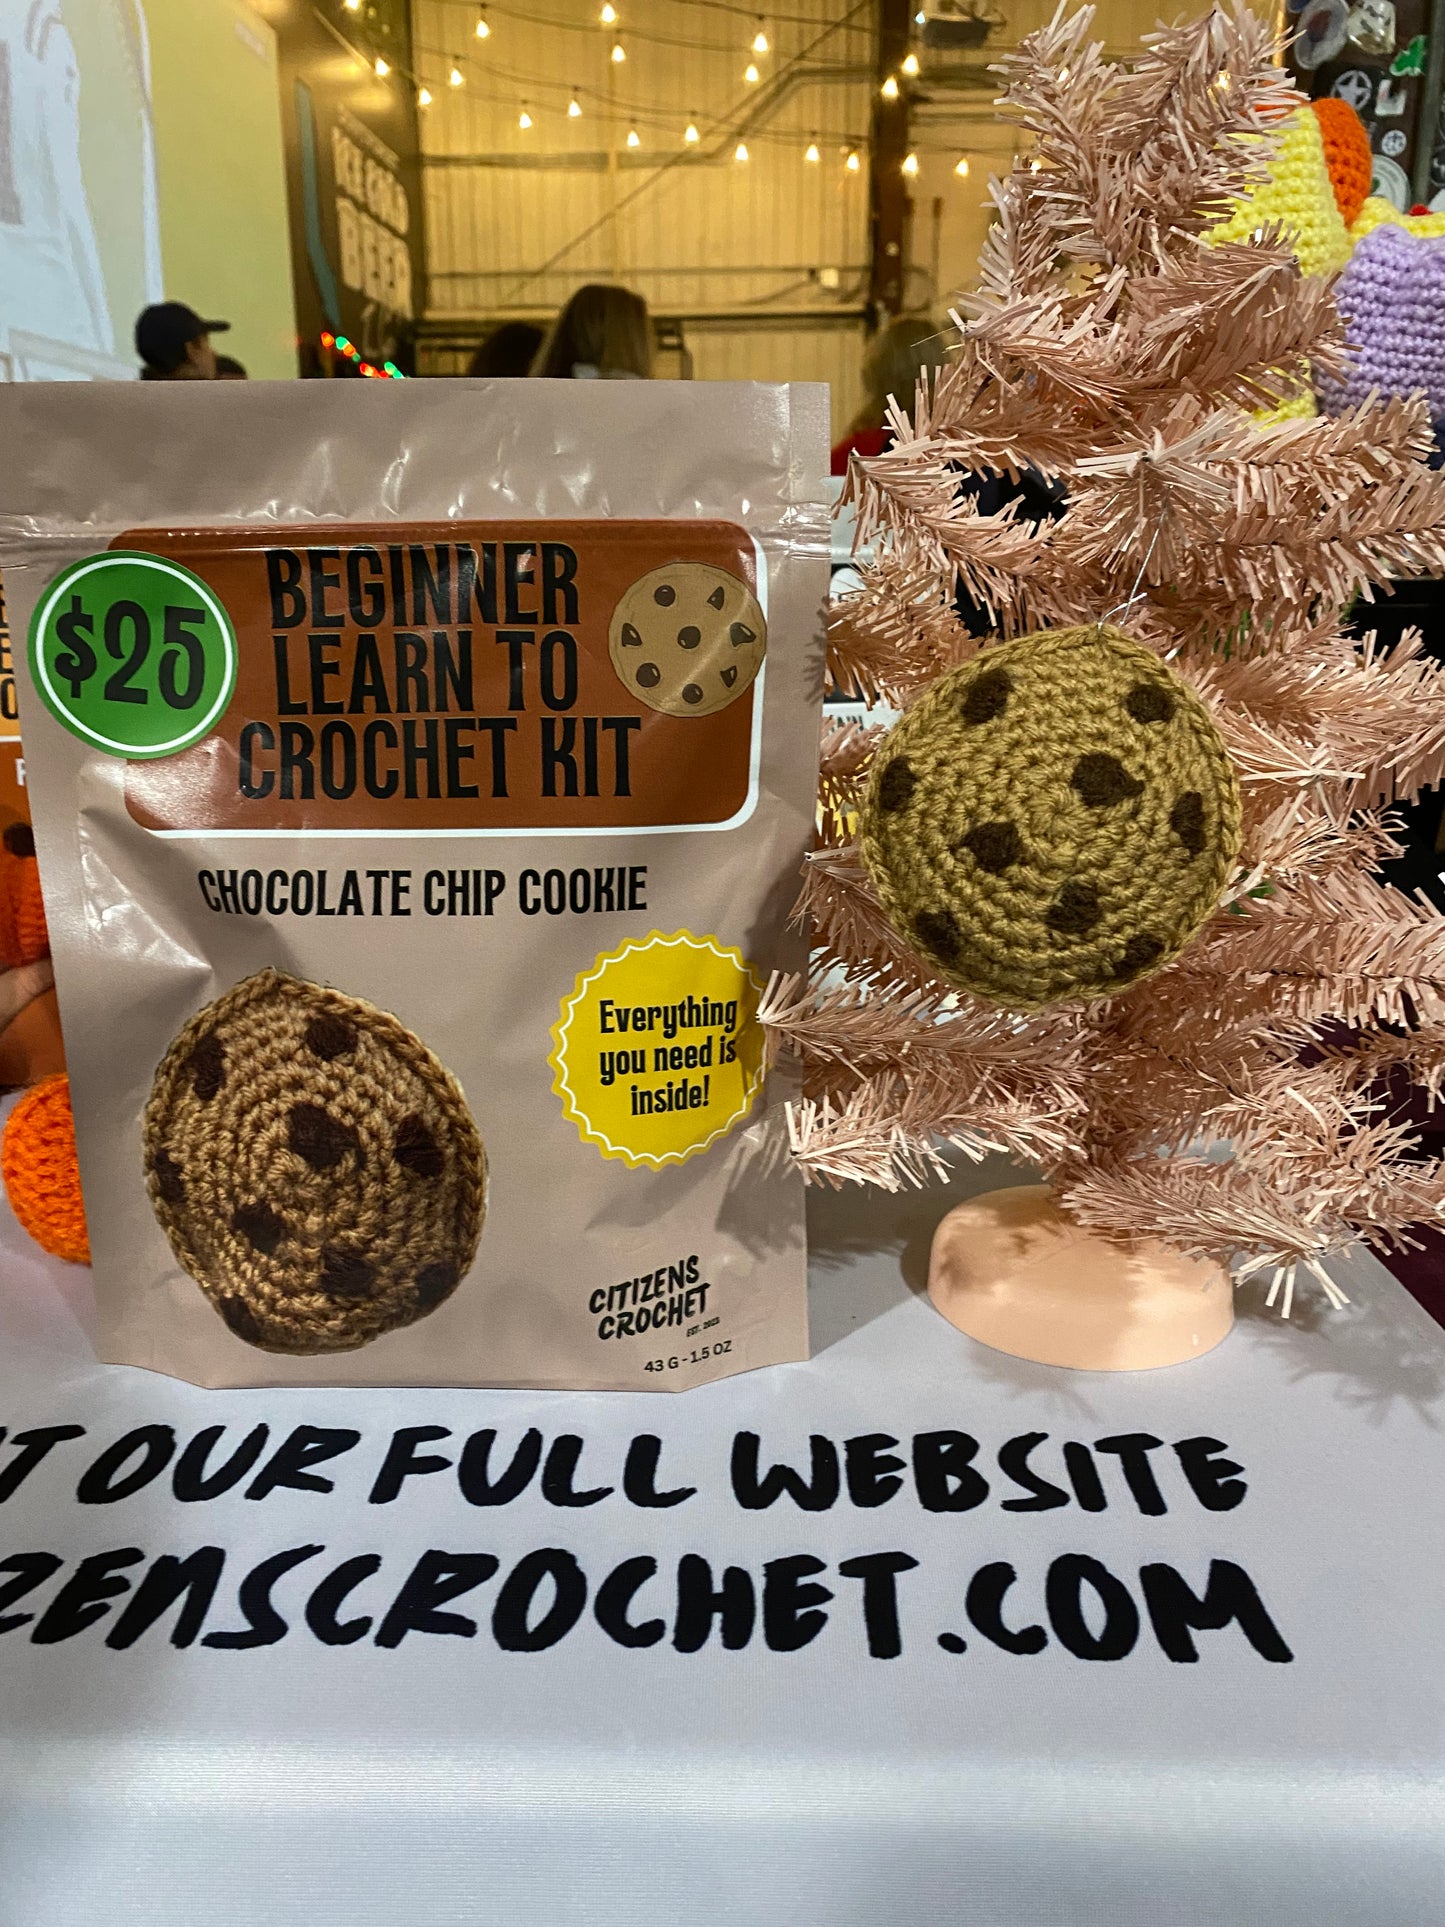 Learn to Crochet Kit Chocolate Chip Cookies